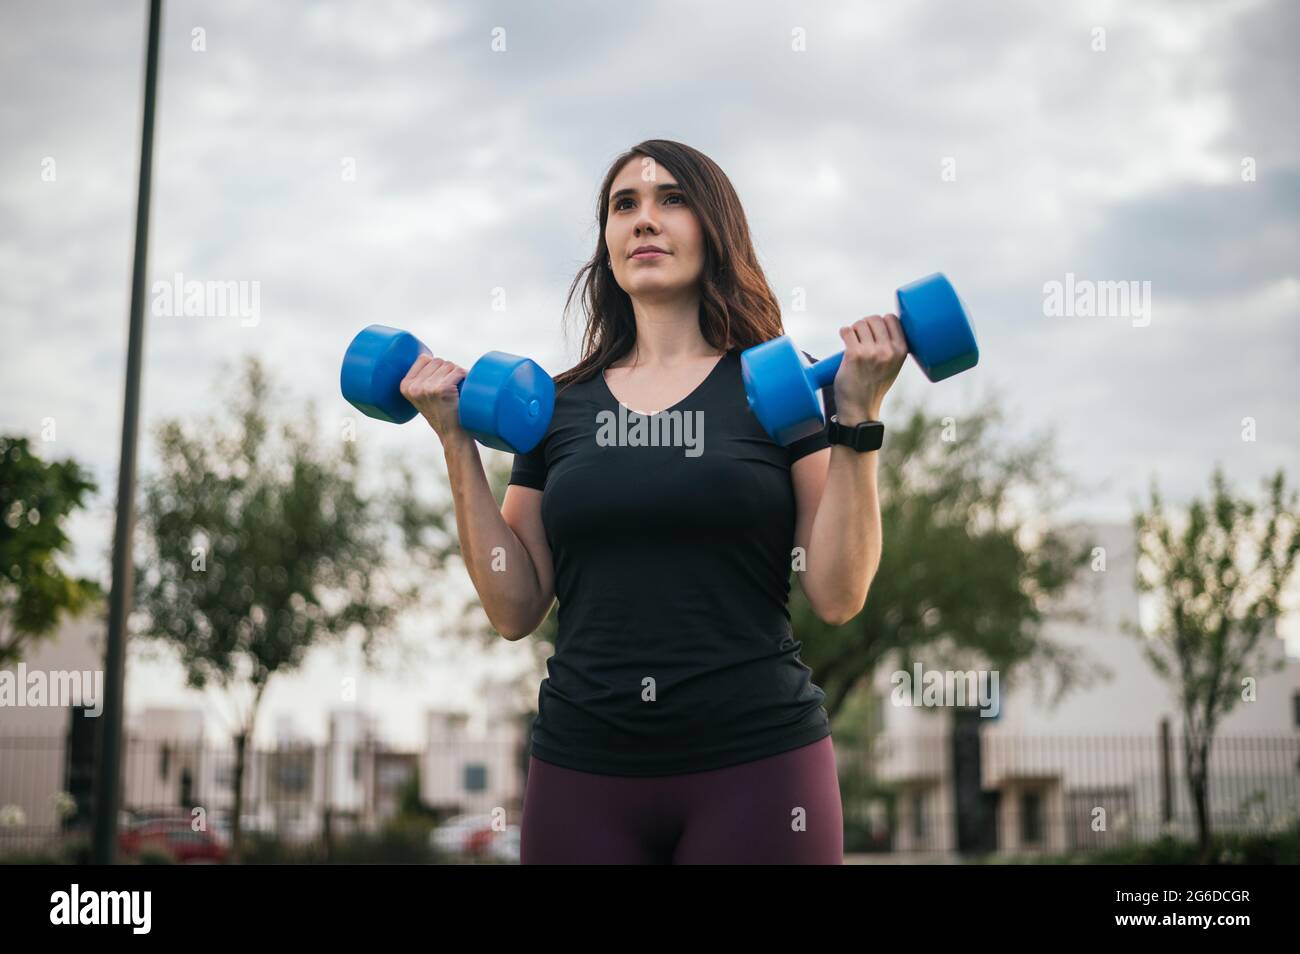 1,220 Woman Doing Bicep Curls Images, Stock Photos, 3D objects, & Vectors